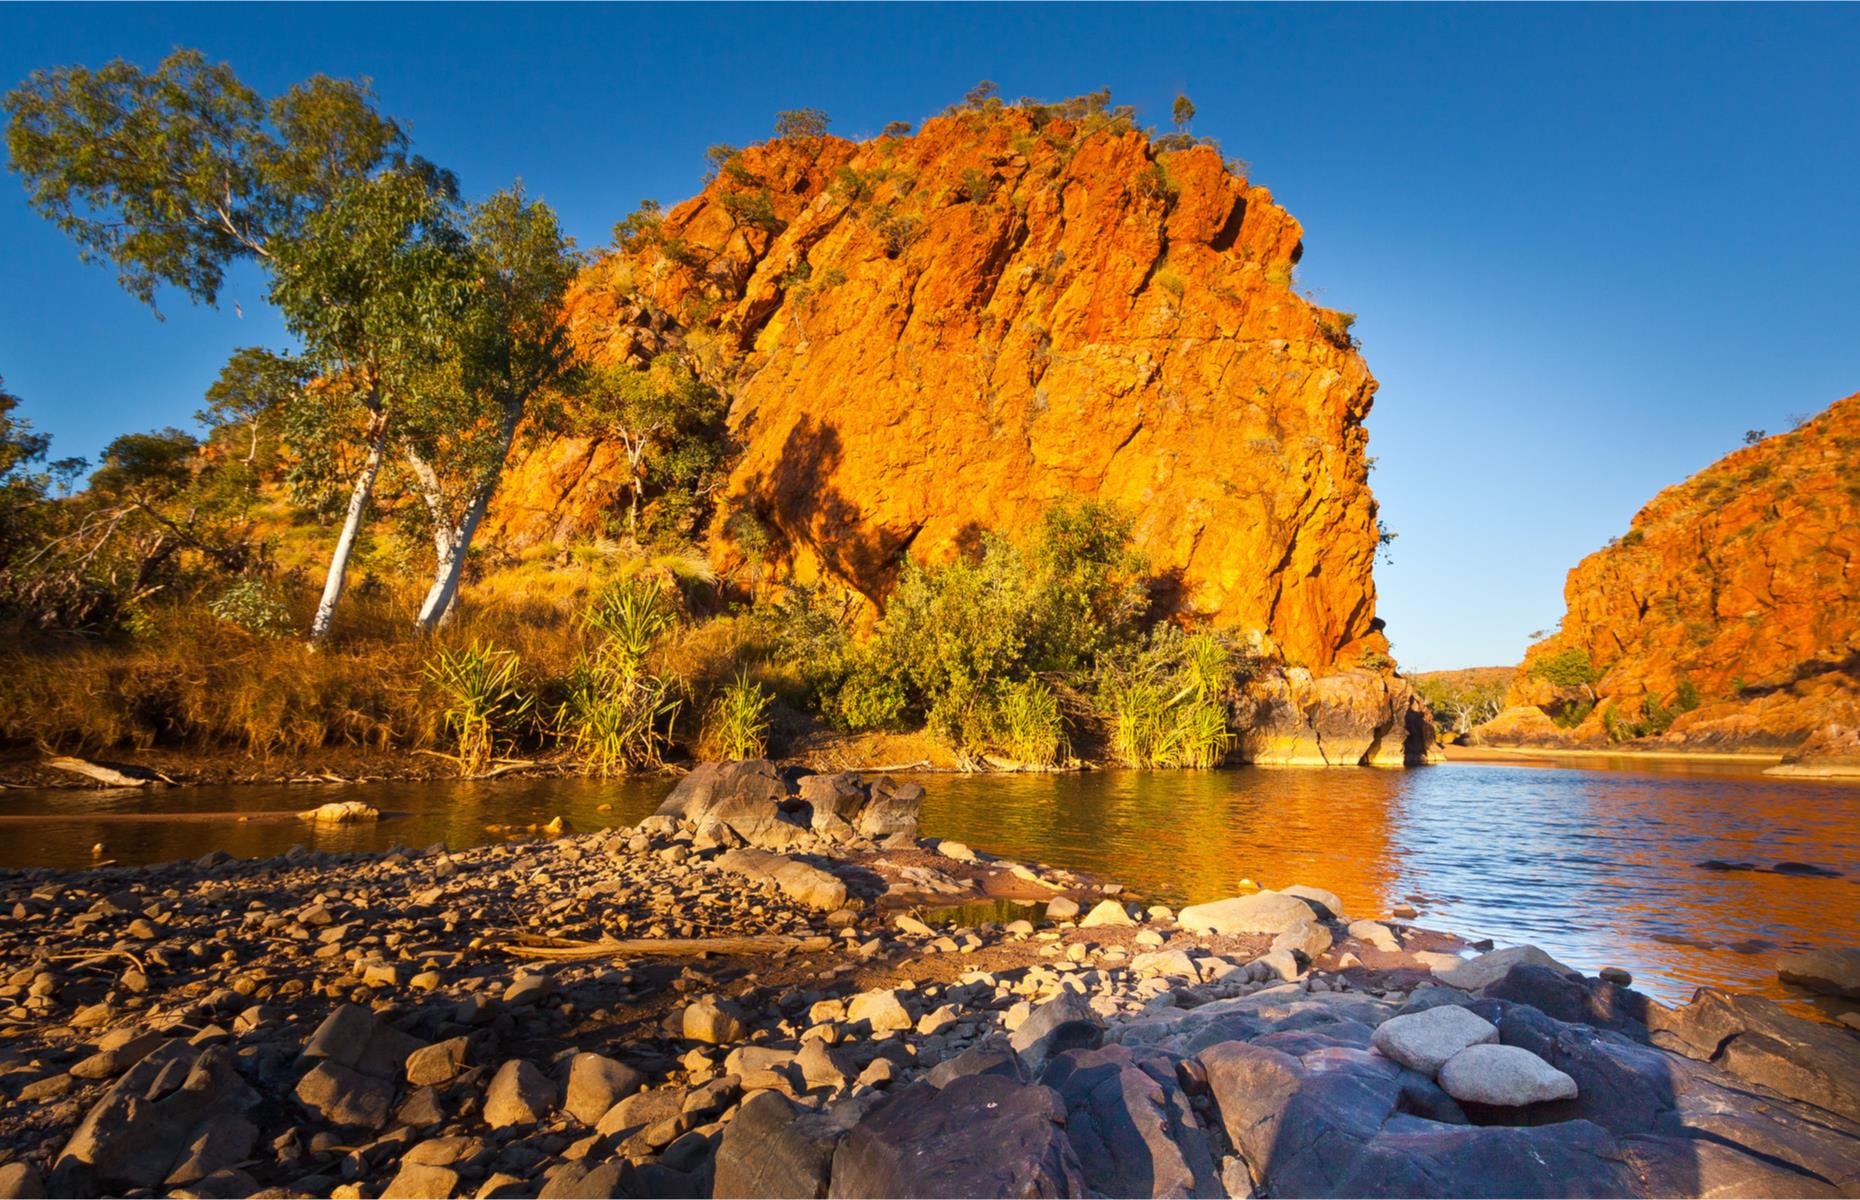 Slide 22 of 32: An oasis-like town on the banks of the Ord River, Kununurra is at the eastern end of the legendary Gibb River Road, an unsealed track which traverses 410 miles (660km) through the beautiful wilderness of the Kimberley region. It's a beaut of a base to explore East Kimberly. Water is the main attraction here with the town’s name derived from Aboriginal language meaning big water. Days here are all about exploring the area's striking waterways. 